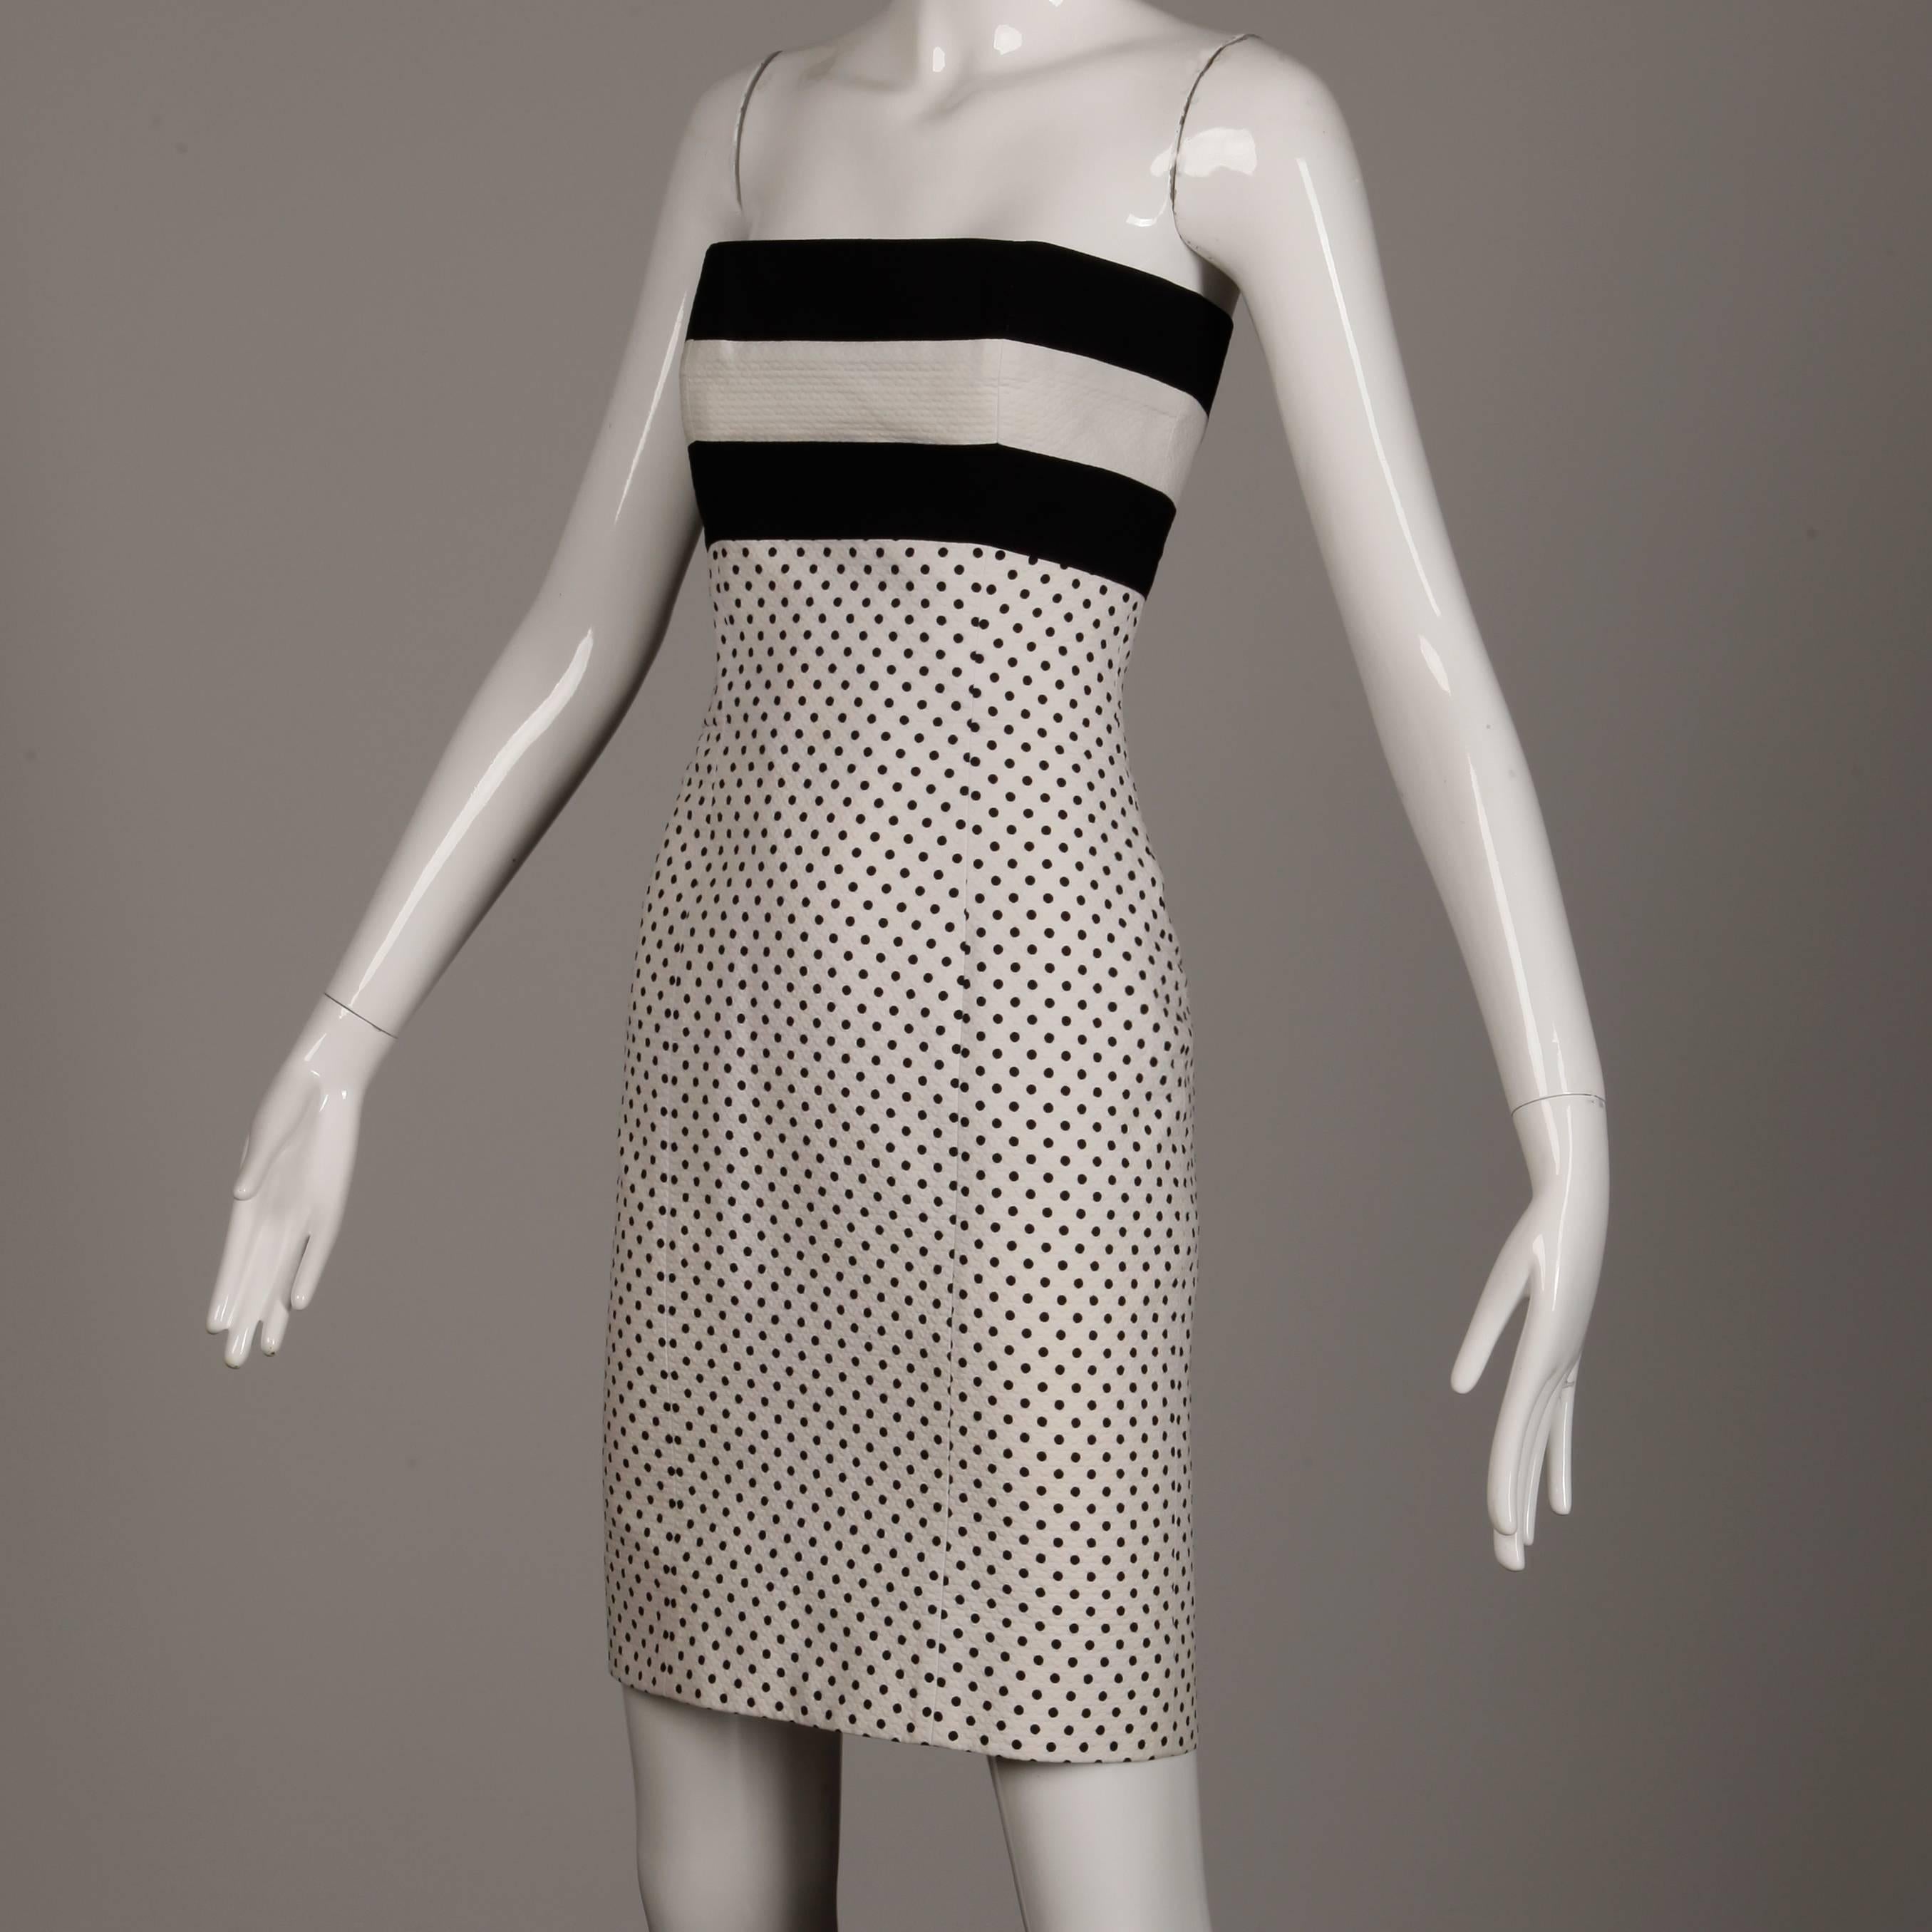 1980s Escada Vintage Black + White Polka Dot Striped Print Strapless Dress In Excellent Condition For Sale In Sparks, NV